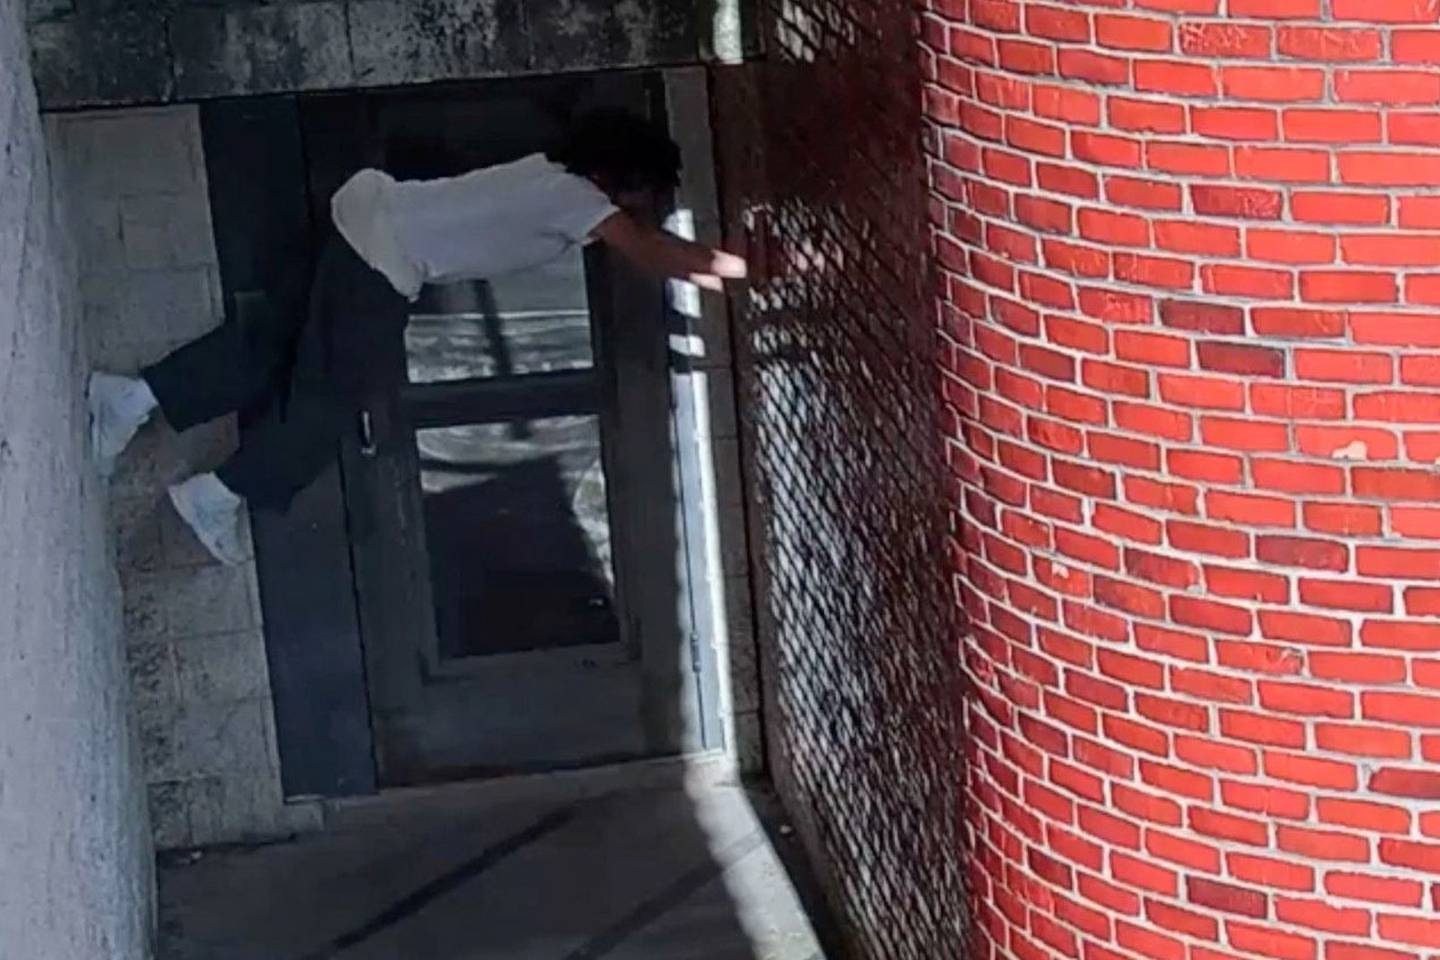 Watch: convicted killer scales wall to escape US prison